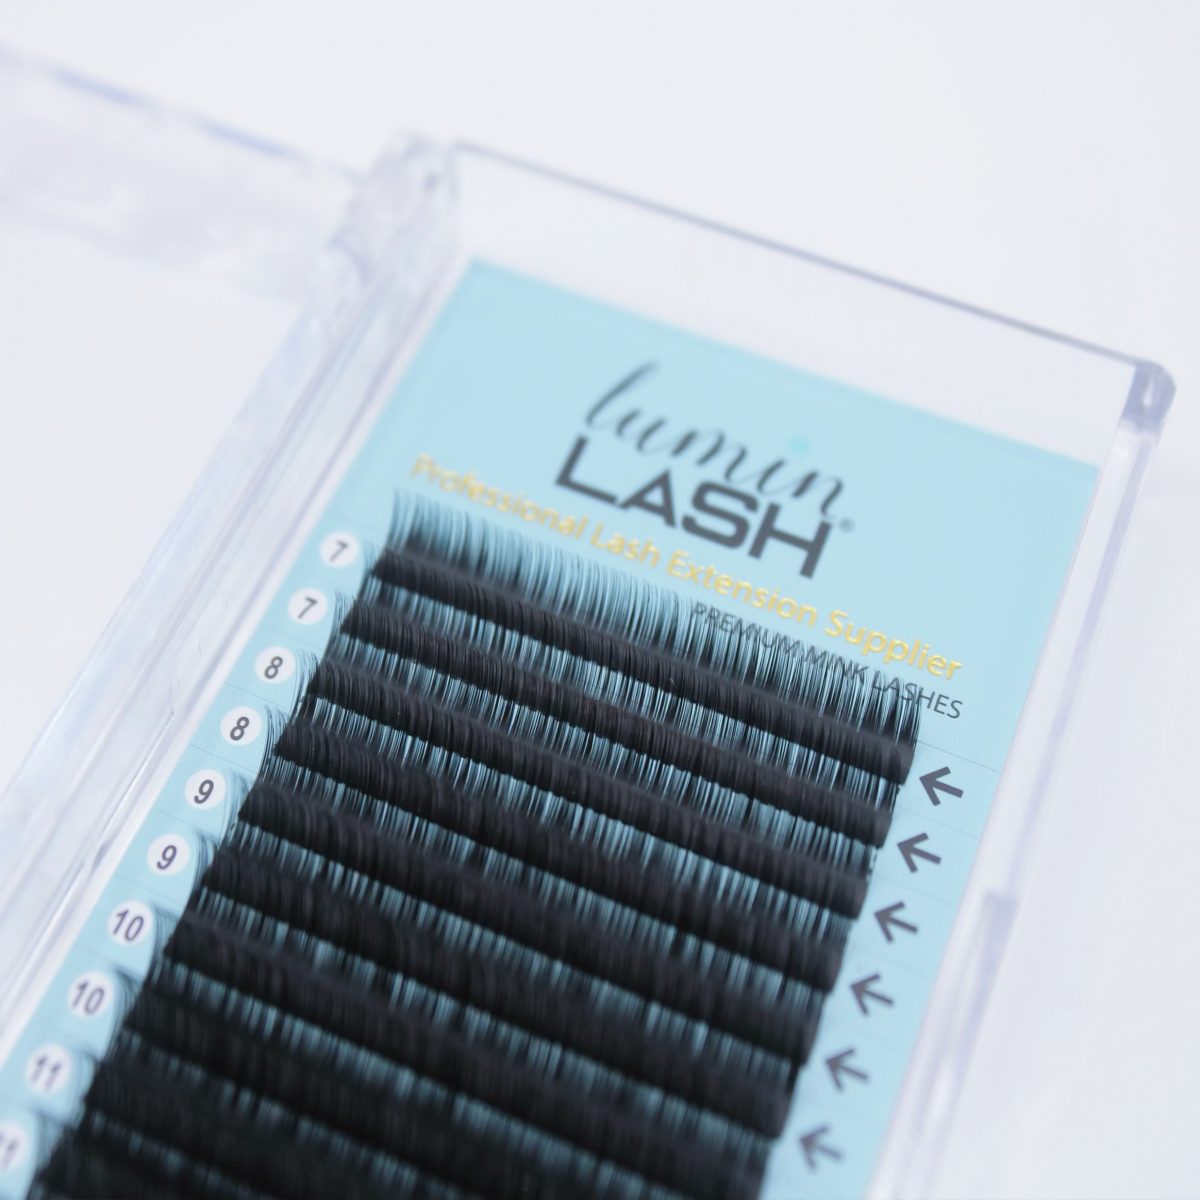 COLLECTION – Cashmere Mink Lashes 0.15